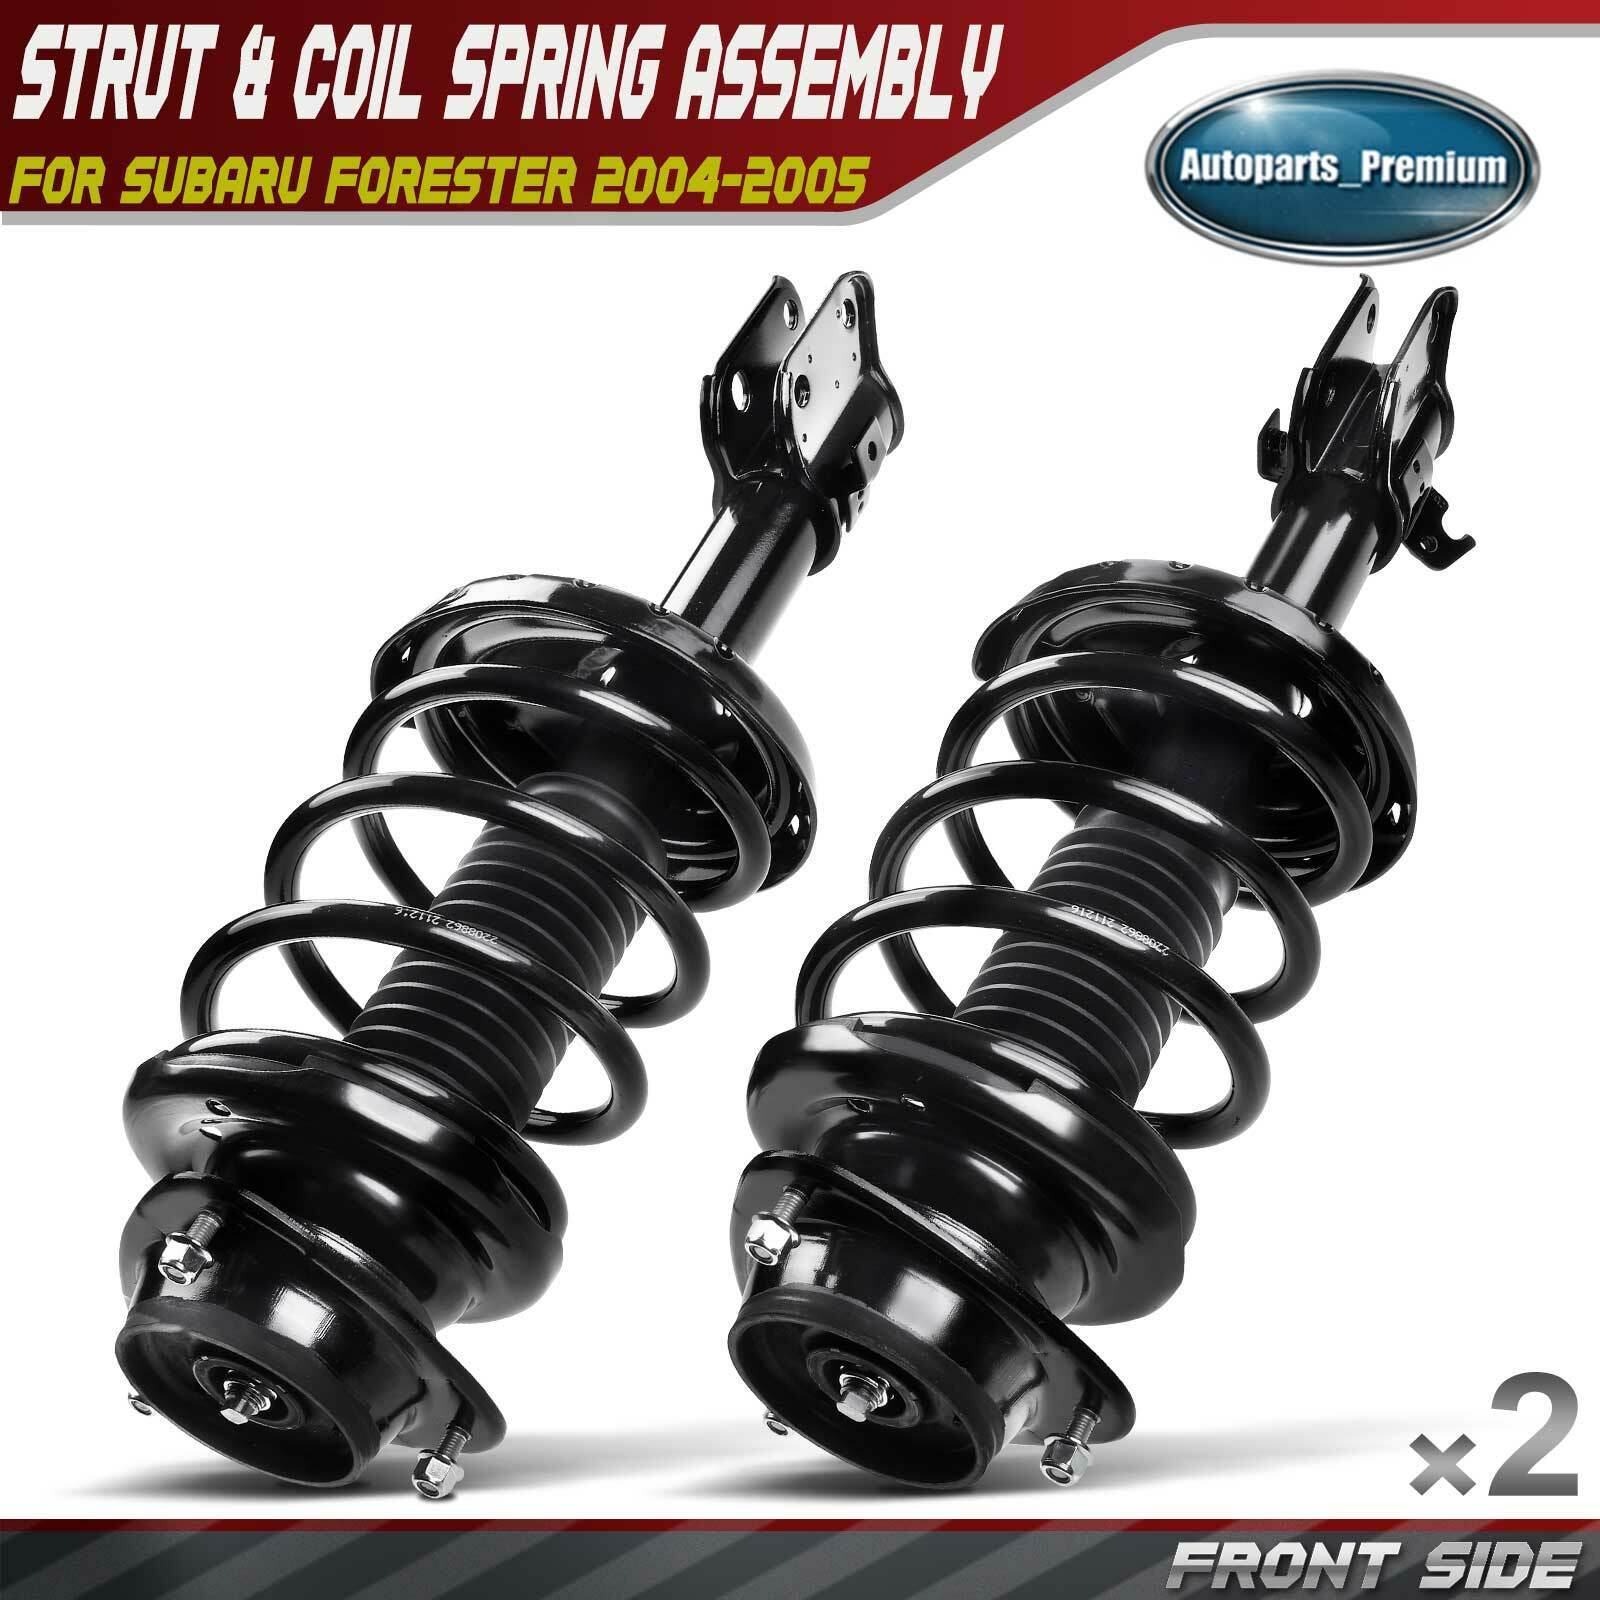 2pcs Front Complete Strut & Coil Assembly for Subaru Forester 2004-2005 H4 2.5L